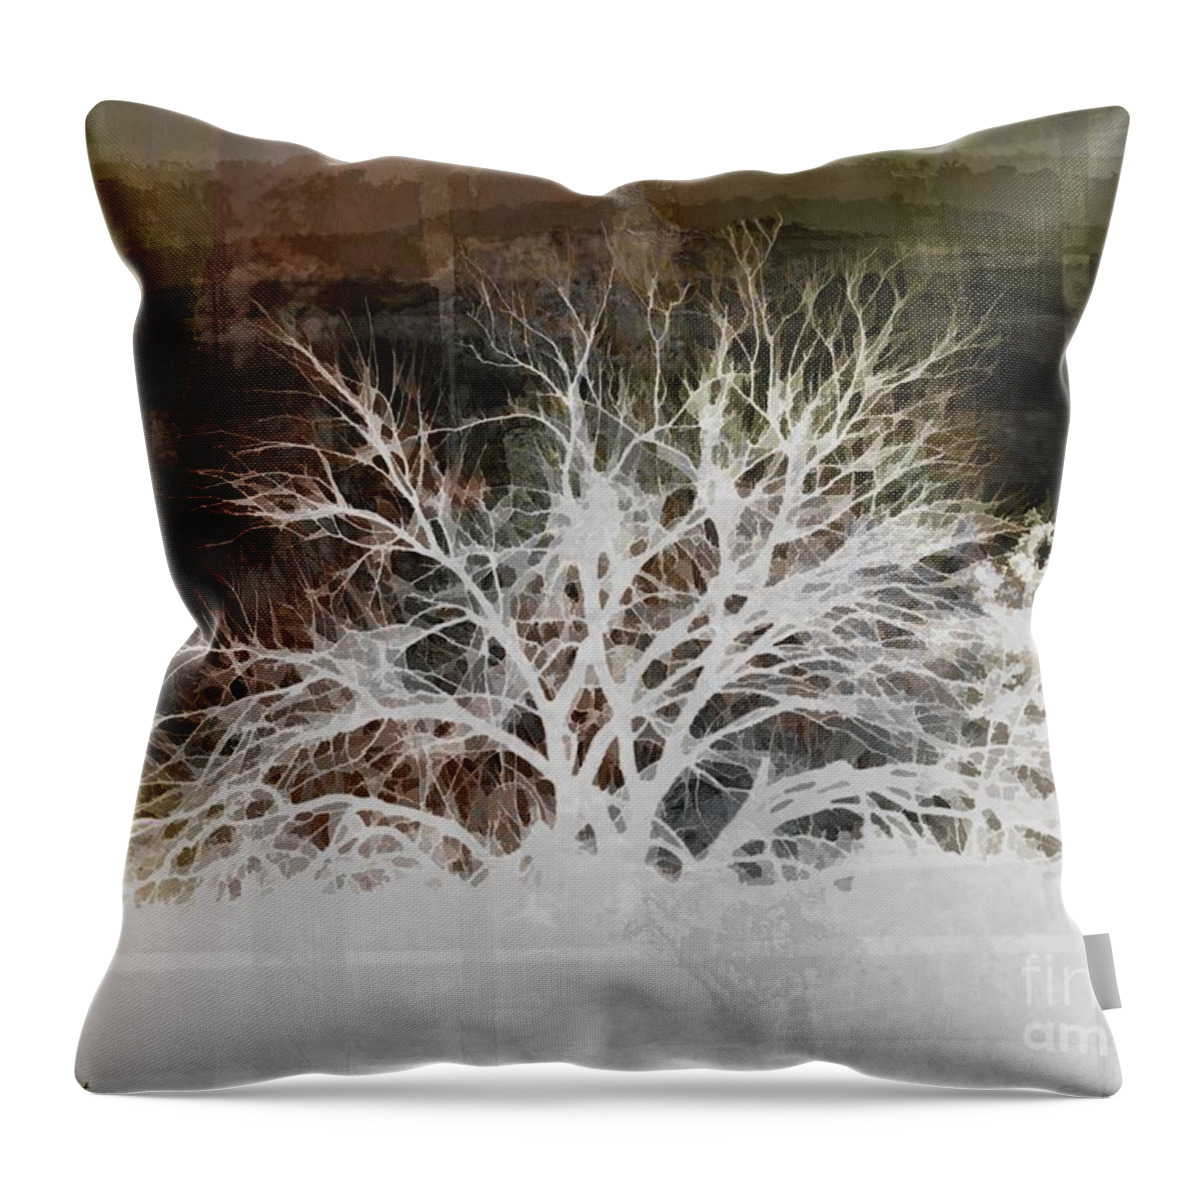 Nature Throw Pillow featuring the photograph Southern Mo. Sunrise Digital Paint 7 by Debbie Portwood